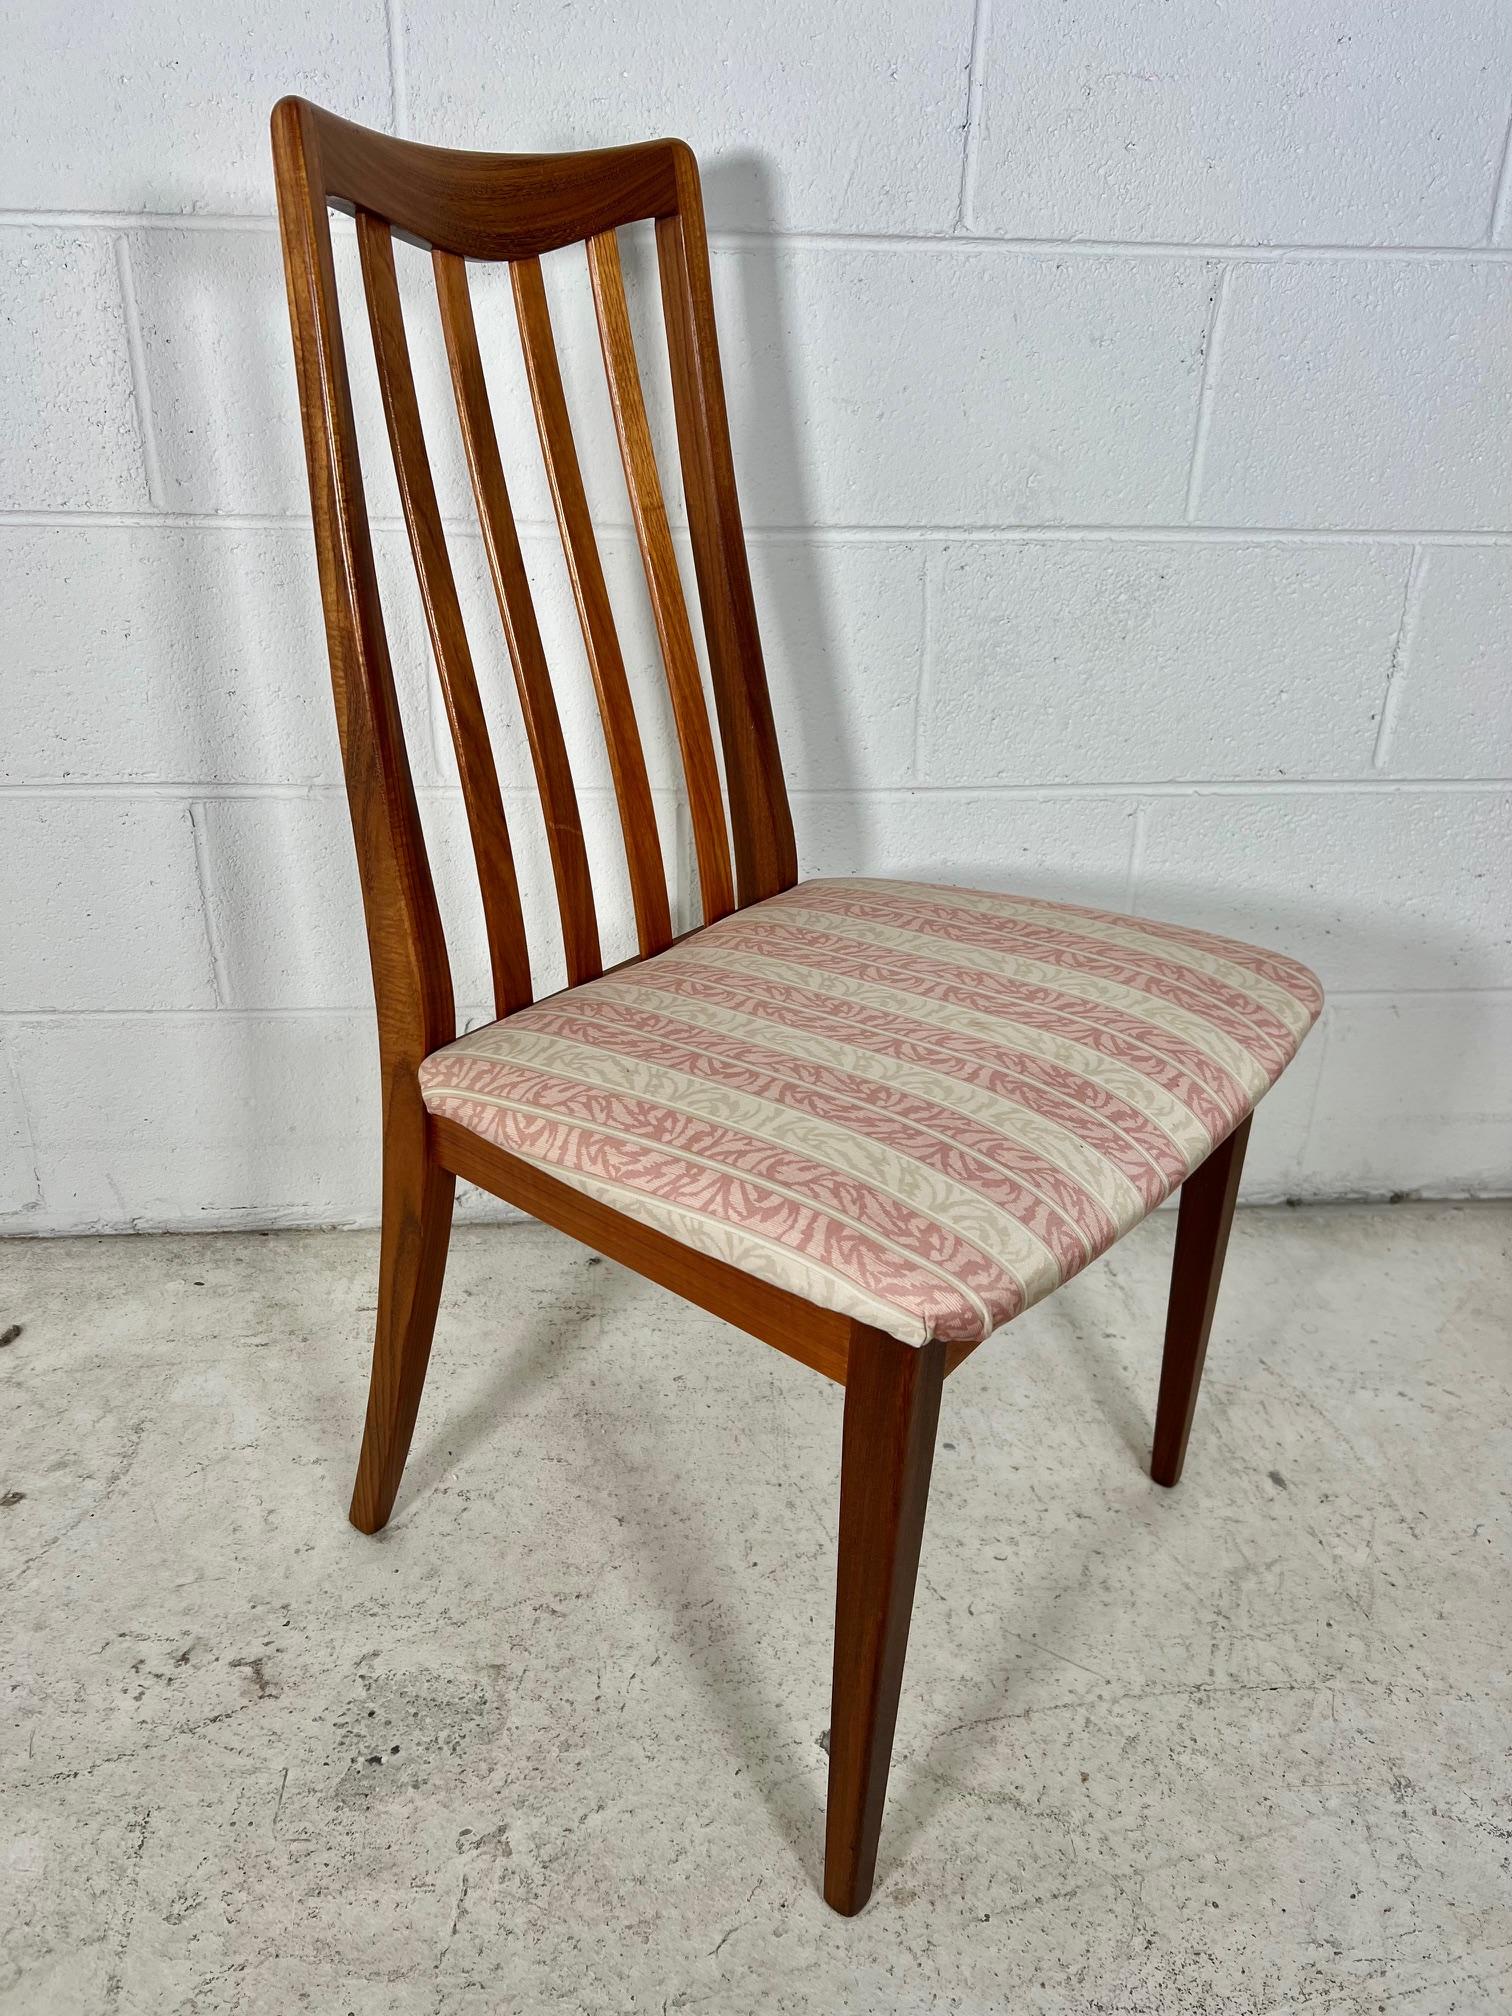 Set Of 6 Mid Century Modern Teak Chairs By G Plan Slat Back  2 With Arms 3